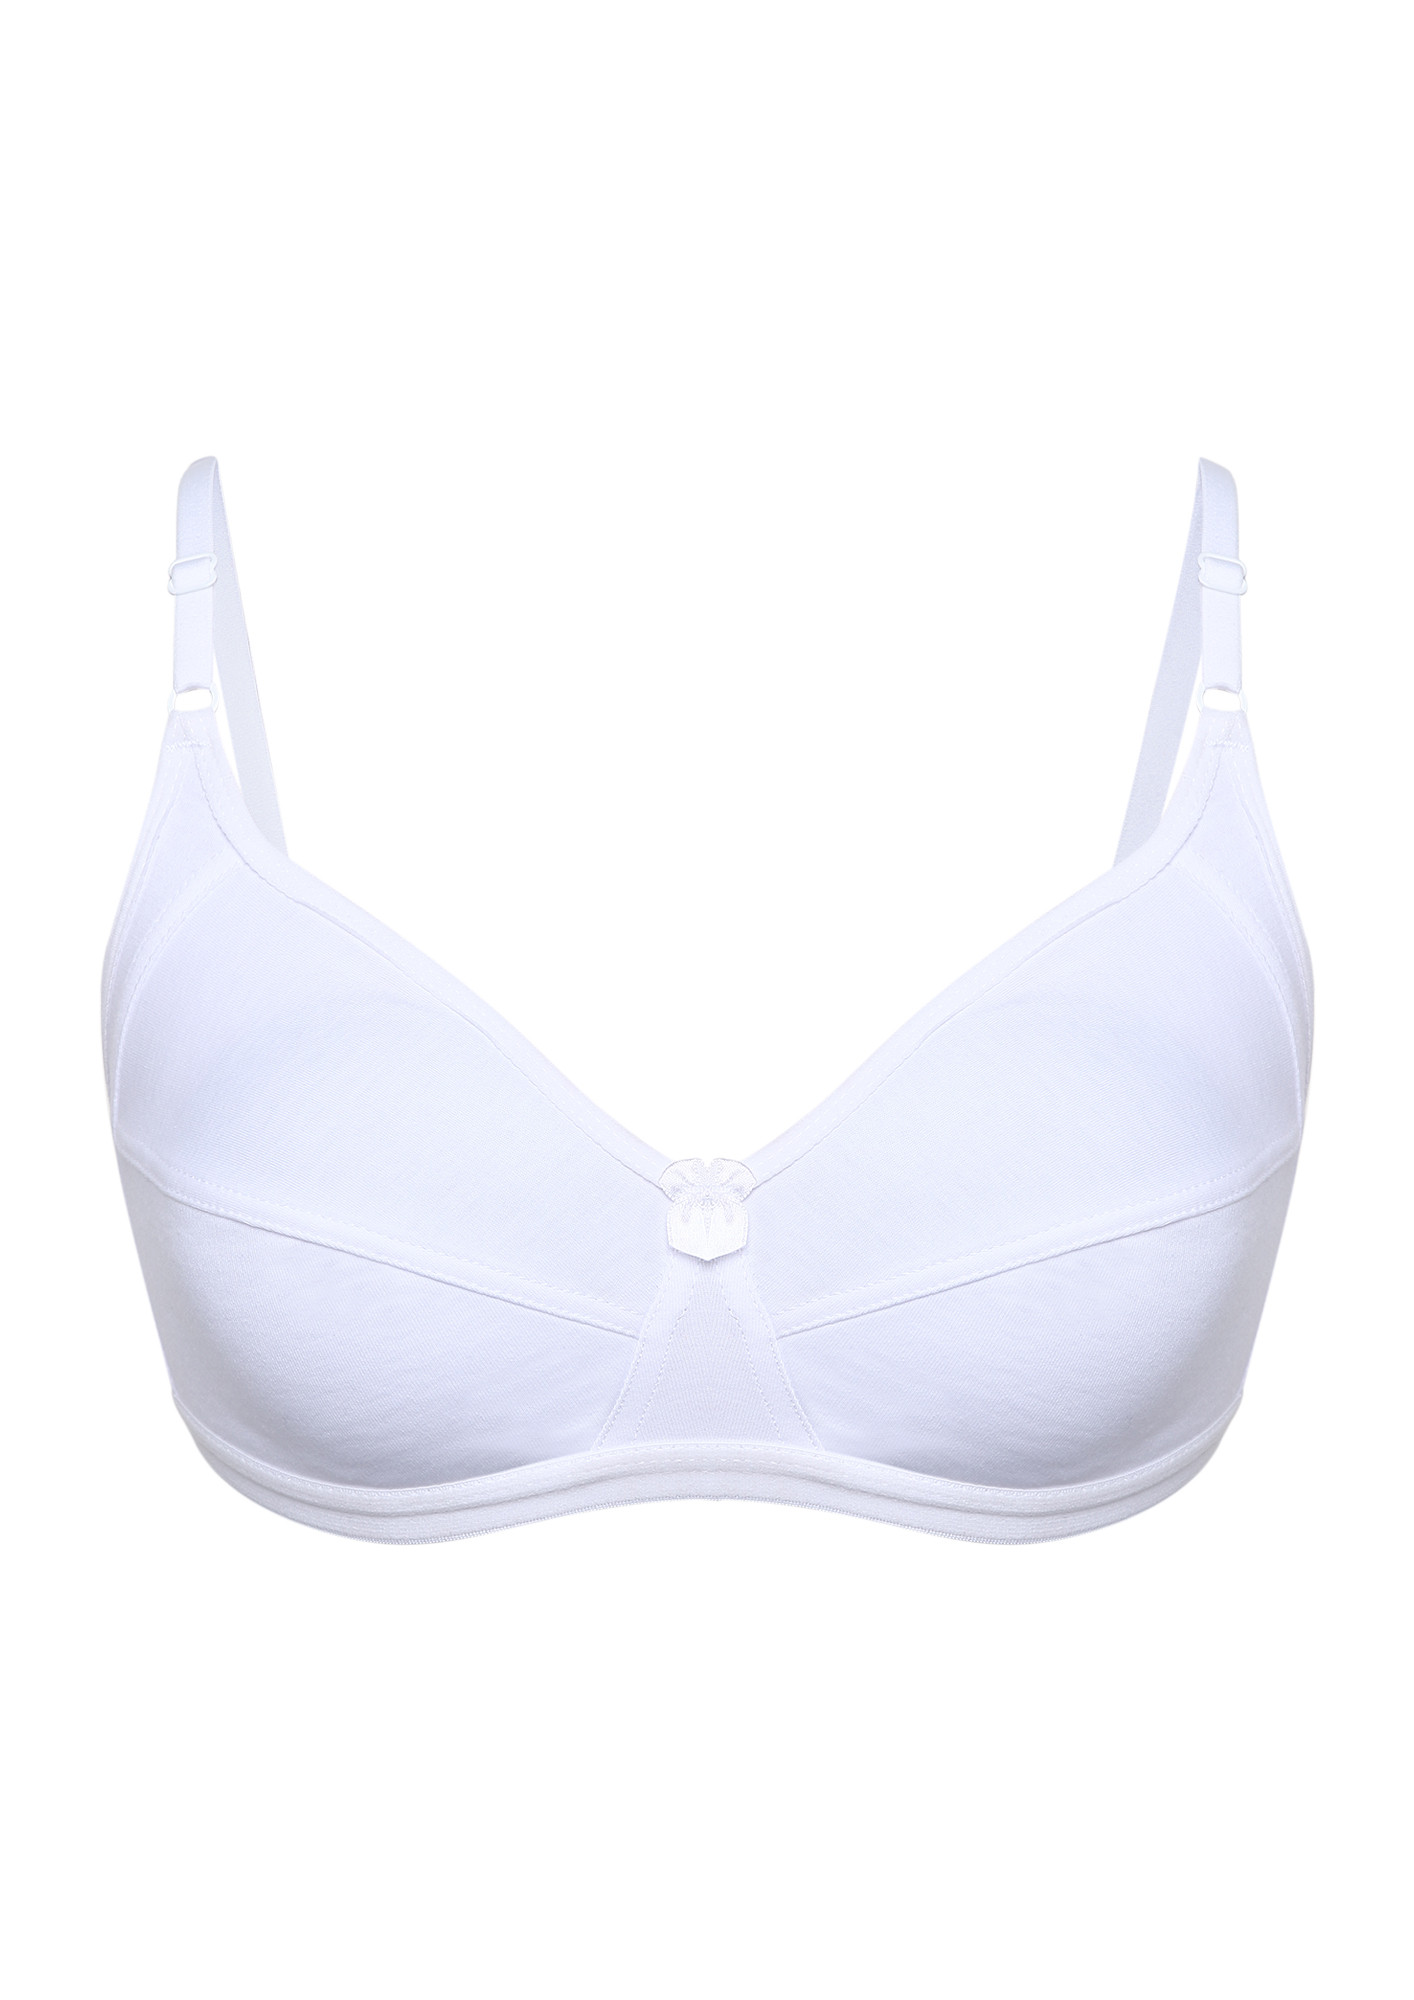 WHIMSCAL TALES NON PADDED NON WIRED WHITE BRA